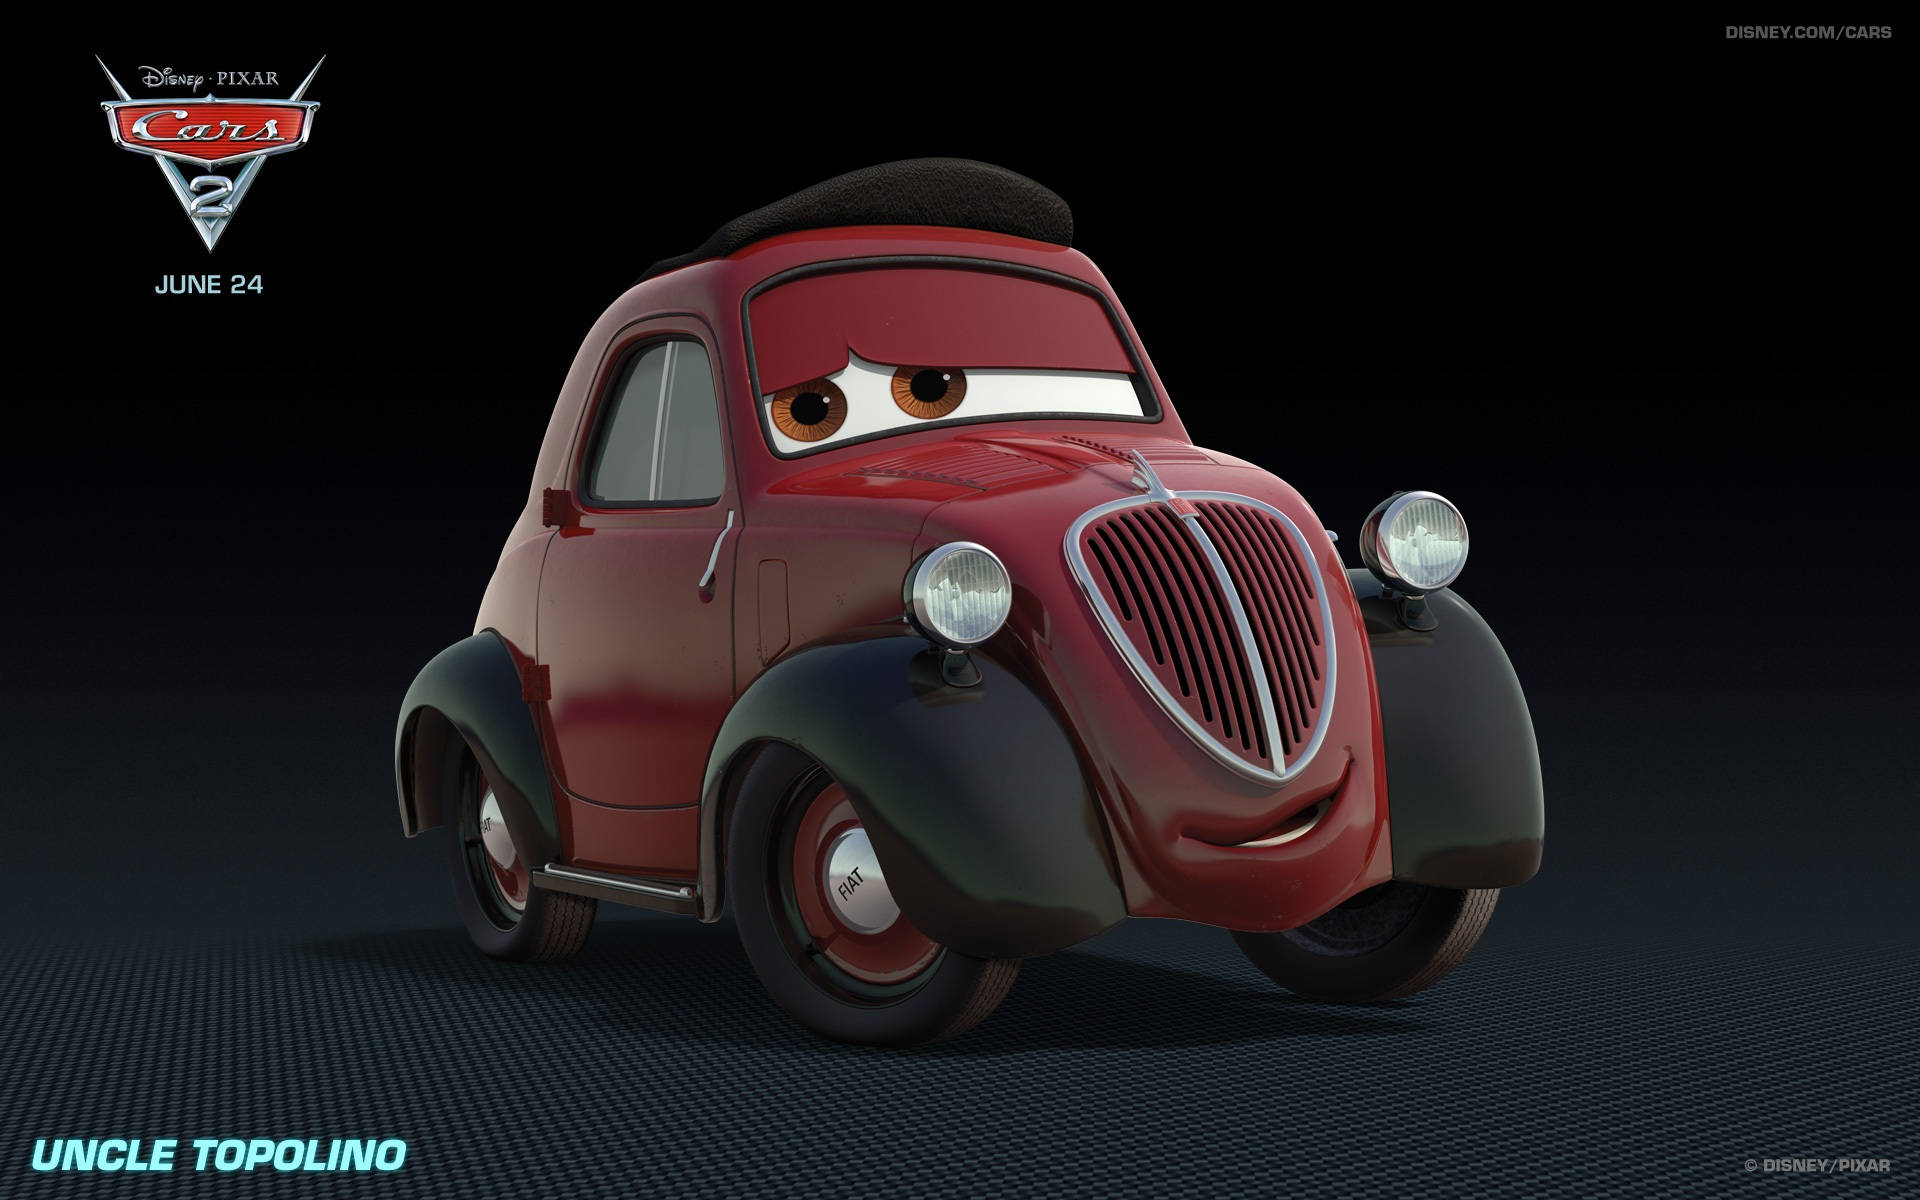 Free Cars 2 Wallpaper Downloads, [100+] Cars 2 Wallpapers for FREE |  